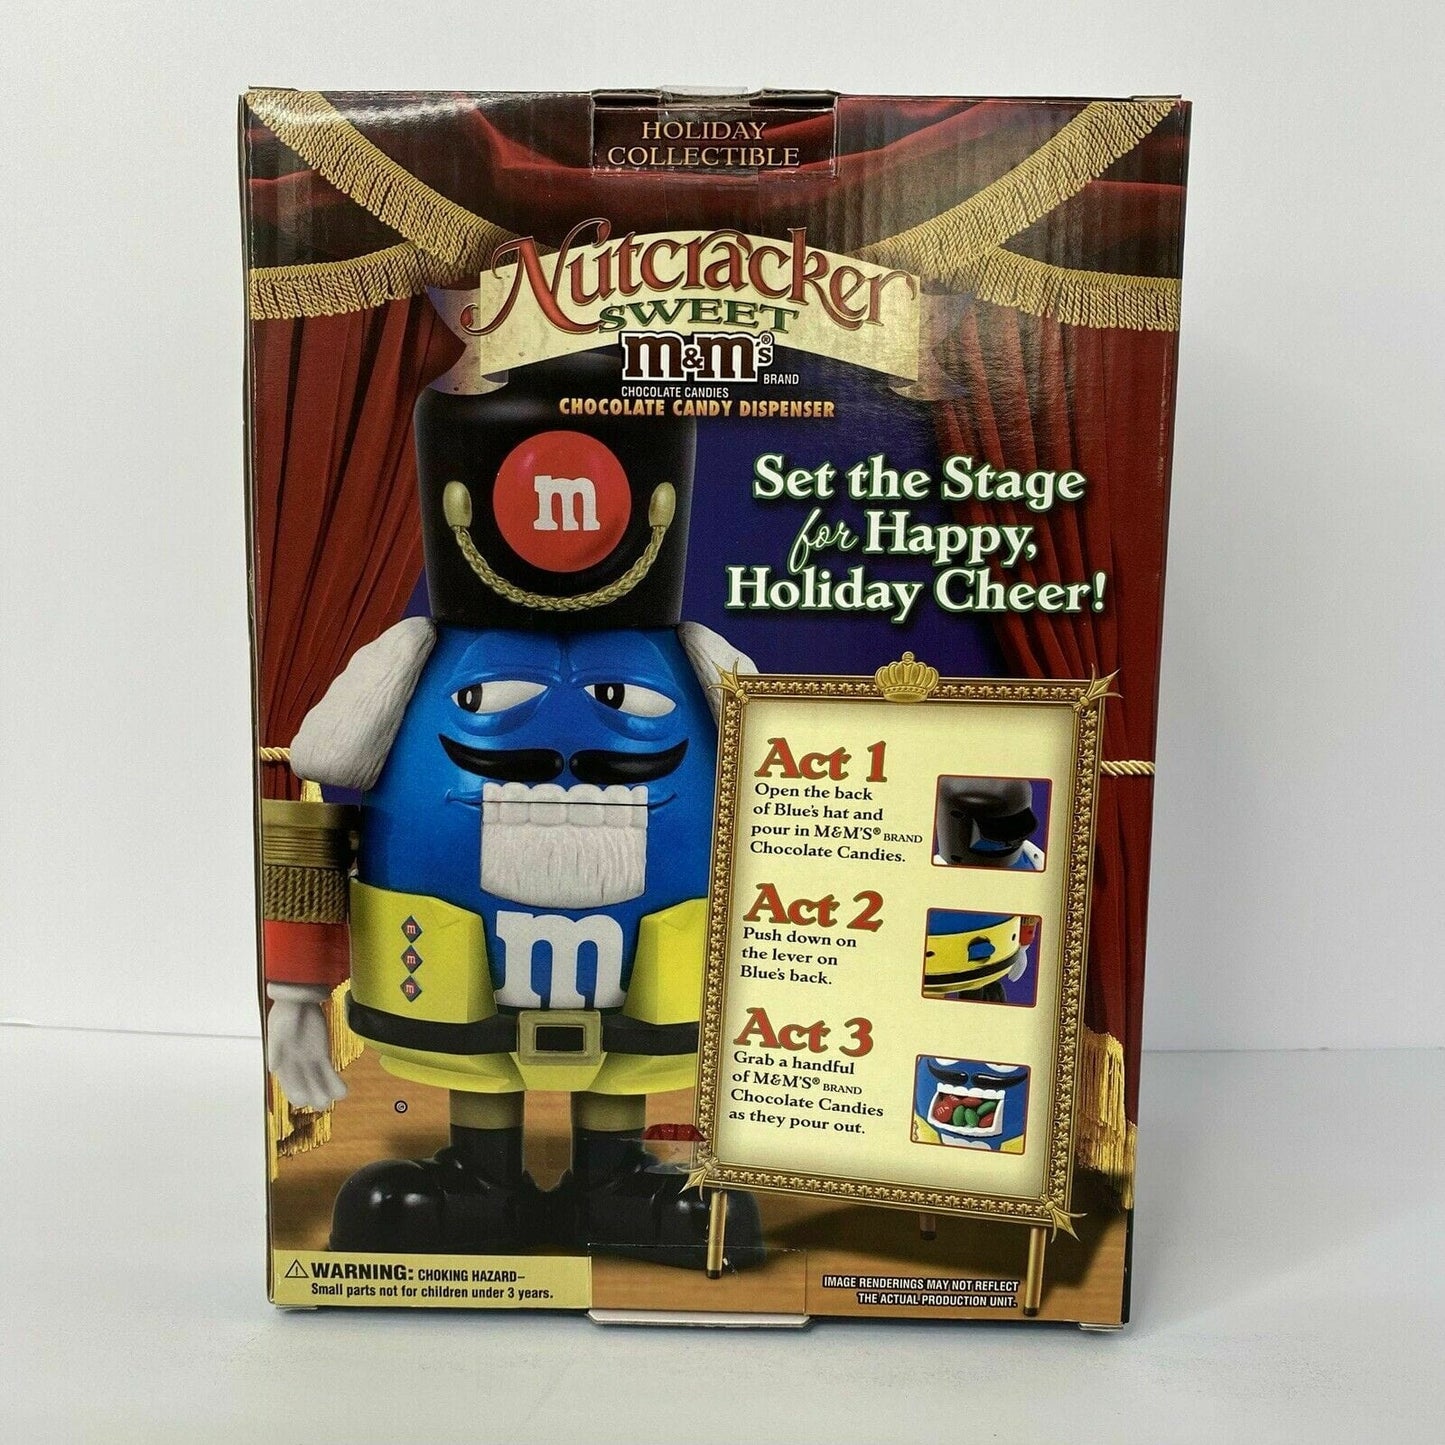 M&M’s MM “Nutcracker Sweet” Candy Dispenser Holiday Christmas Limited Edition